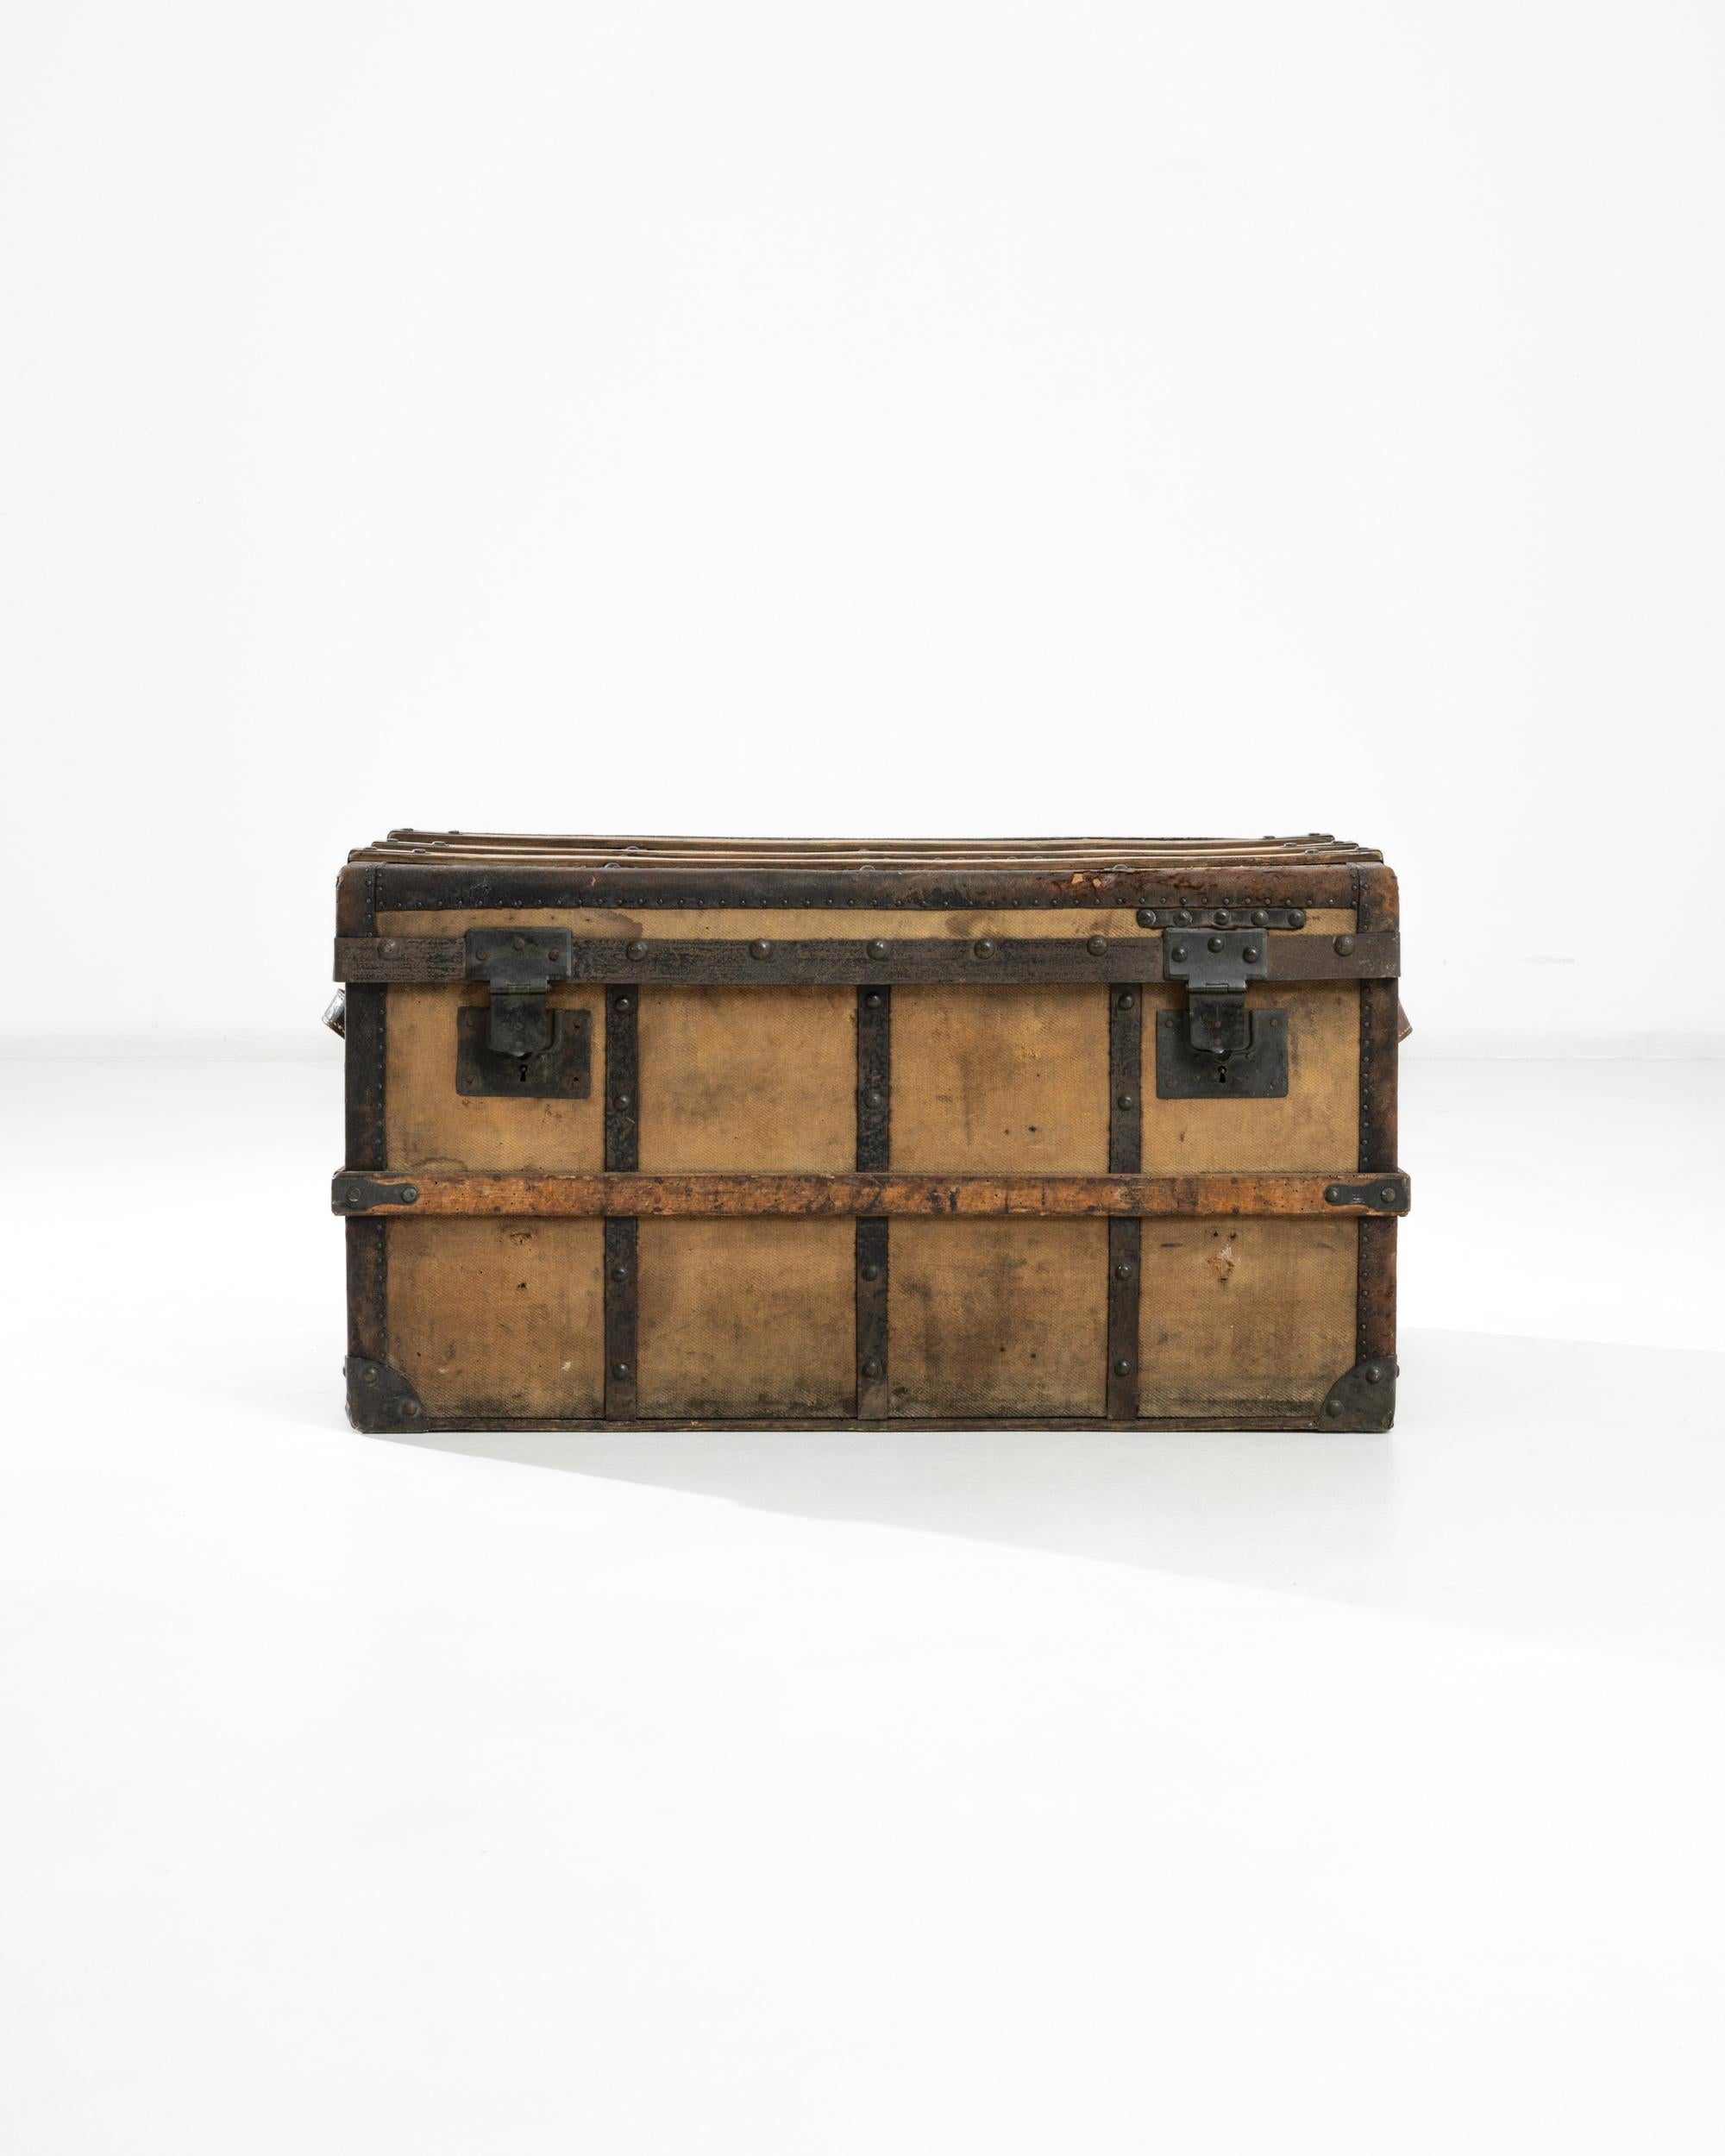 A Belgian wooden chest from the twentieth century. Created by J. Devaux Aine, a luggage fabricator in Brussels, this trunk offers function while radiating character. Its leather, fabric, metal and wood each communicate its age in a subtle patina.